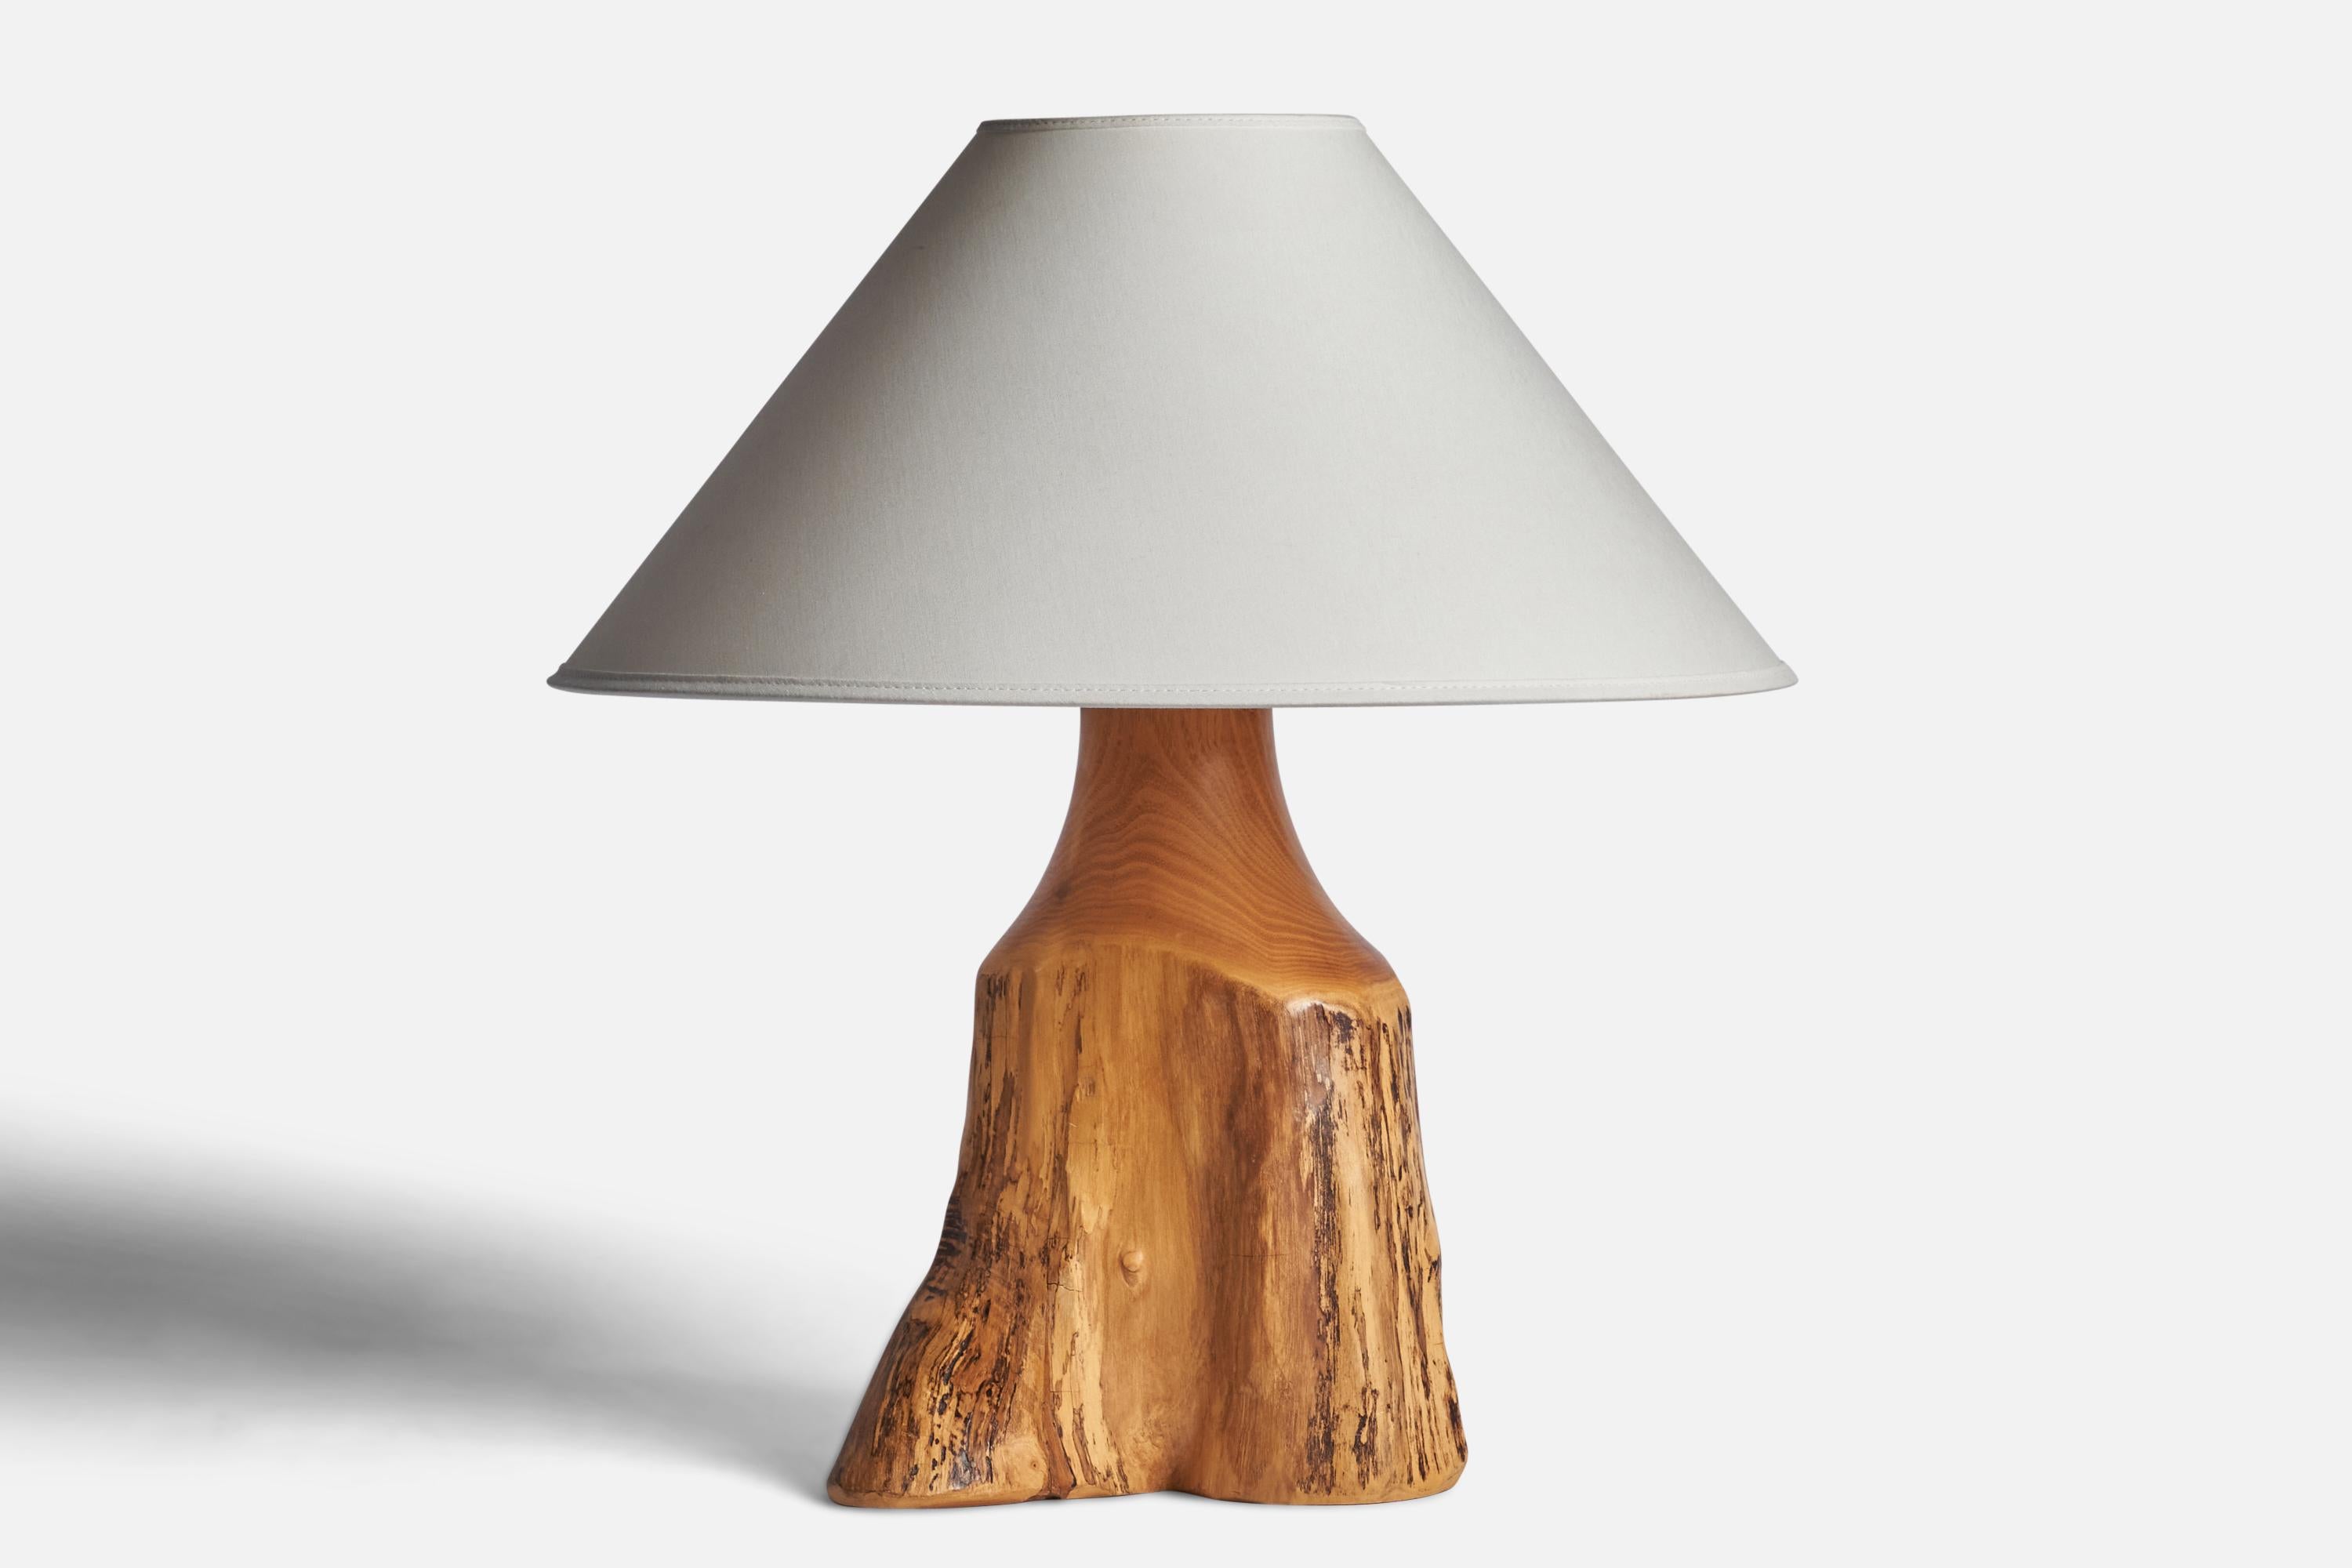 A freeform cottonwood table lamp designed and produced by Sigvard Nilsson, Sweden, 1960s.

Dimensions of Lamp (inches): 13.35” H x 8.25” Diameter
Dimensions of Shade (inches): 4.5” Top Diameter x 16” Bottom Diameter x 7.25” H
Dimensions of Lamp with